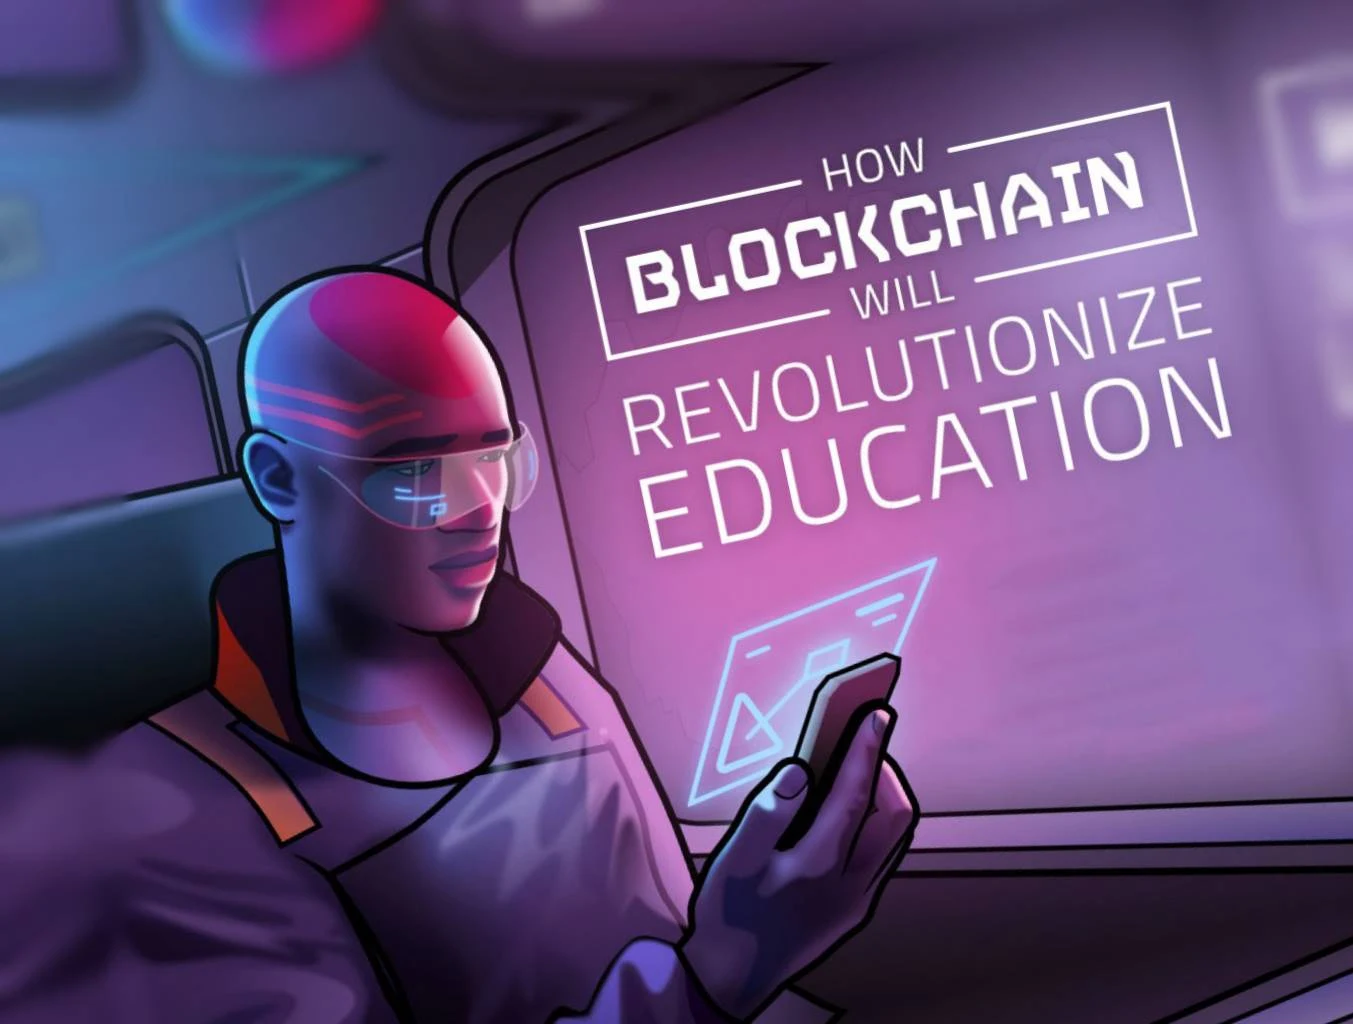 Imagine fleeing your war-torn country with only the clothes on your back and being unable to prove who you are or your level of education once you are finally settled and safe. This infographic outlines how blockchain has the potential to solve that and other issues with education